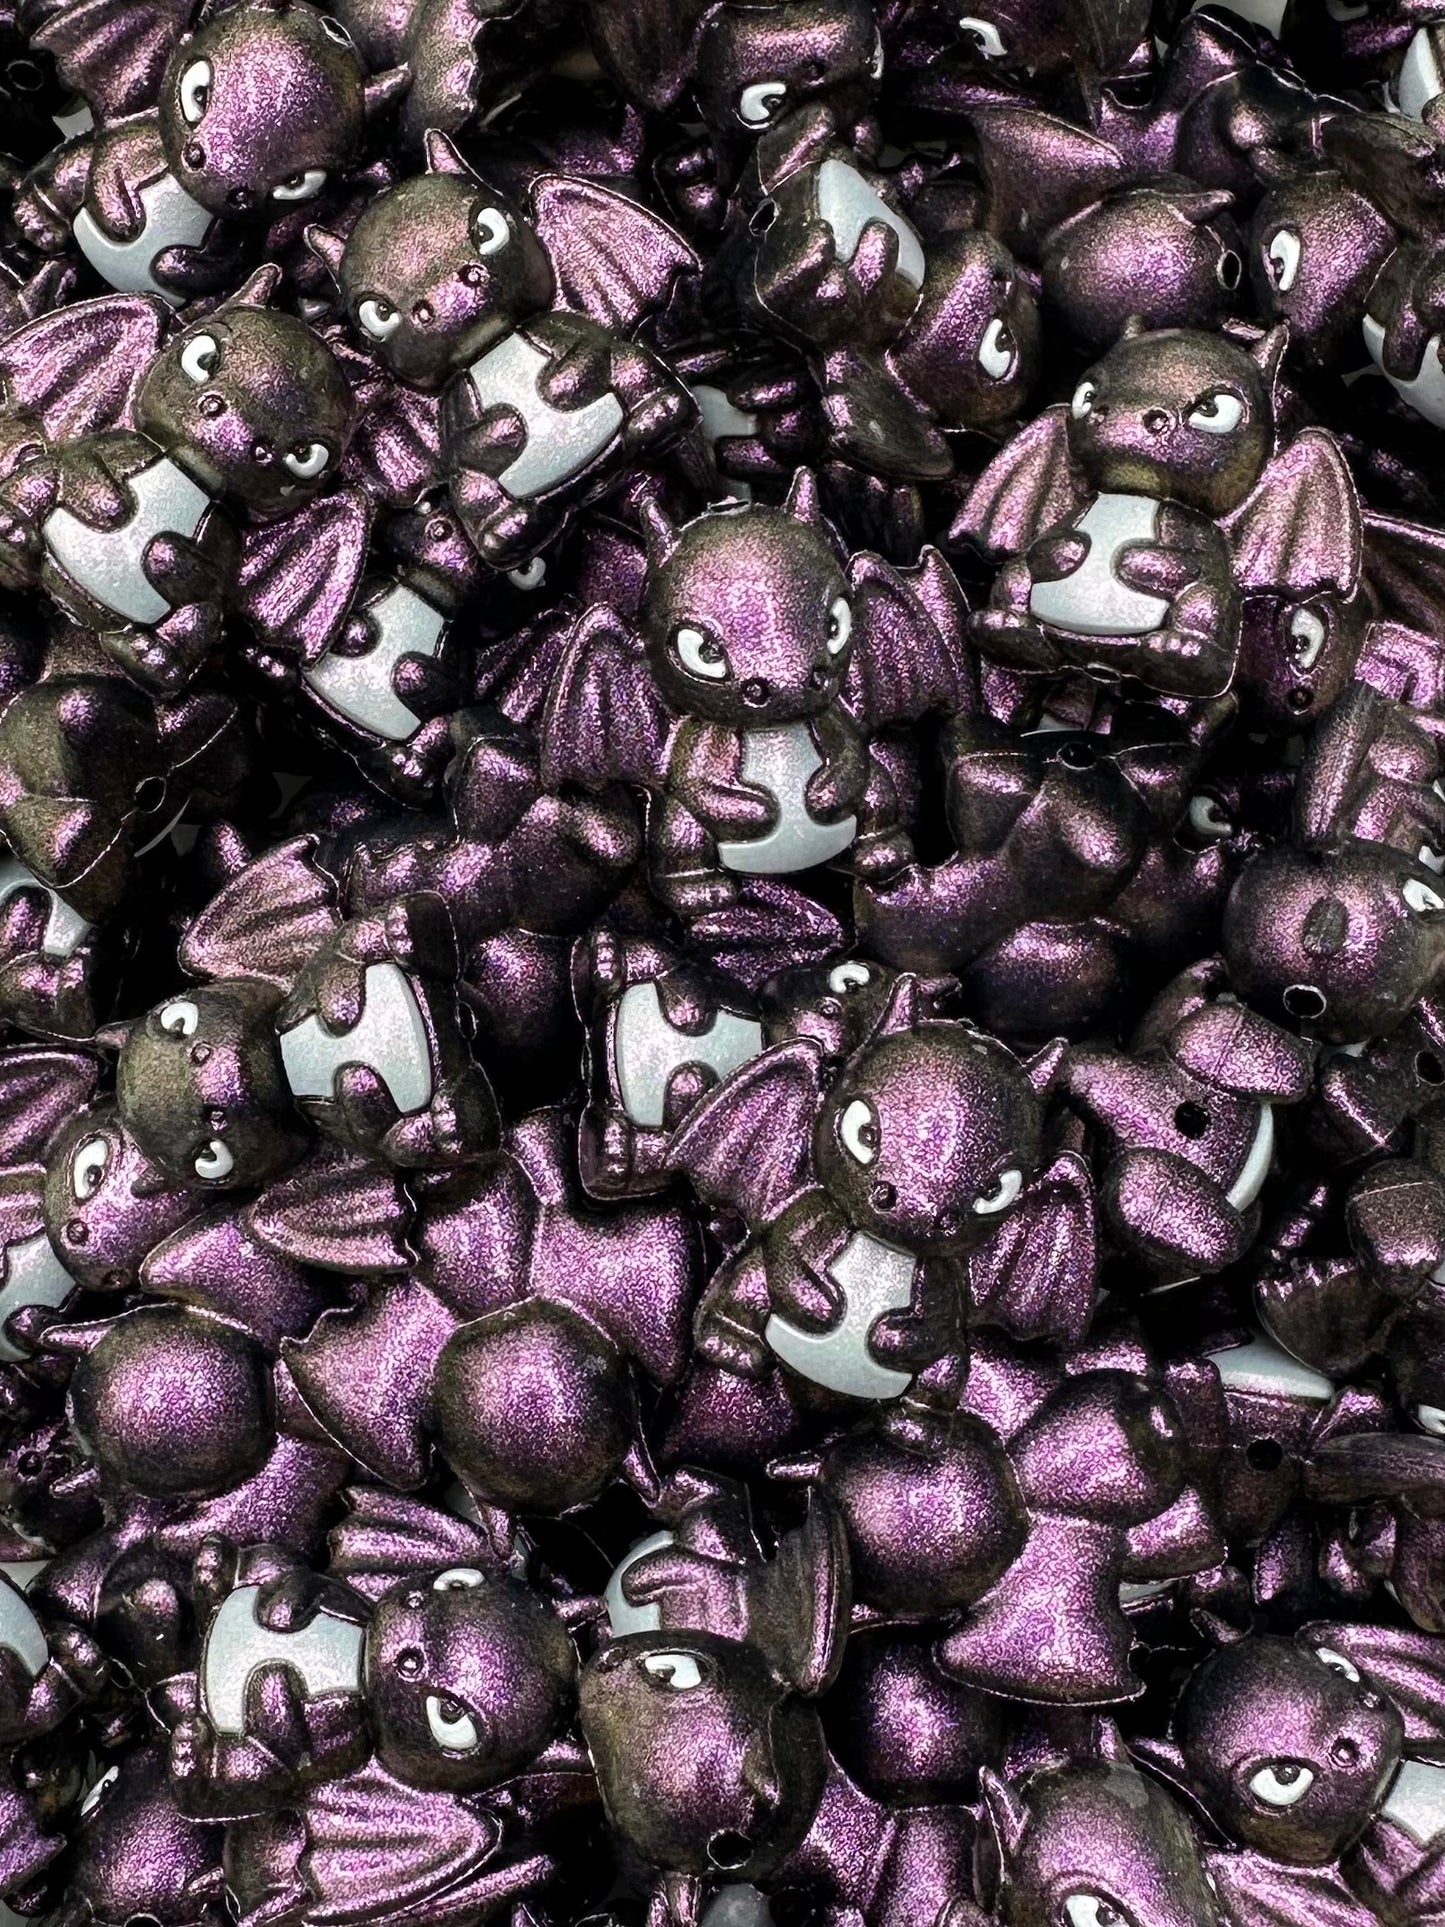 BLESTY the Dragon Focal Bead